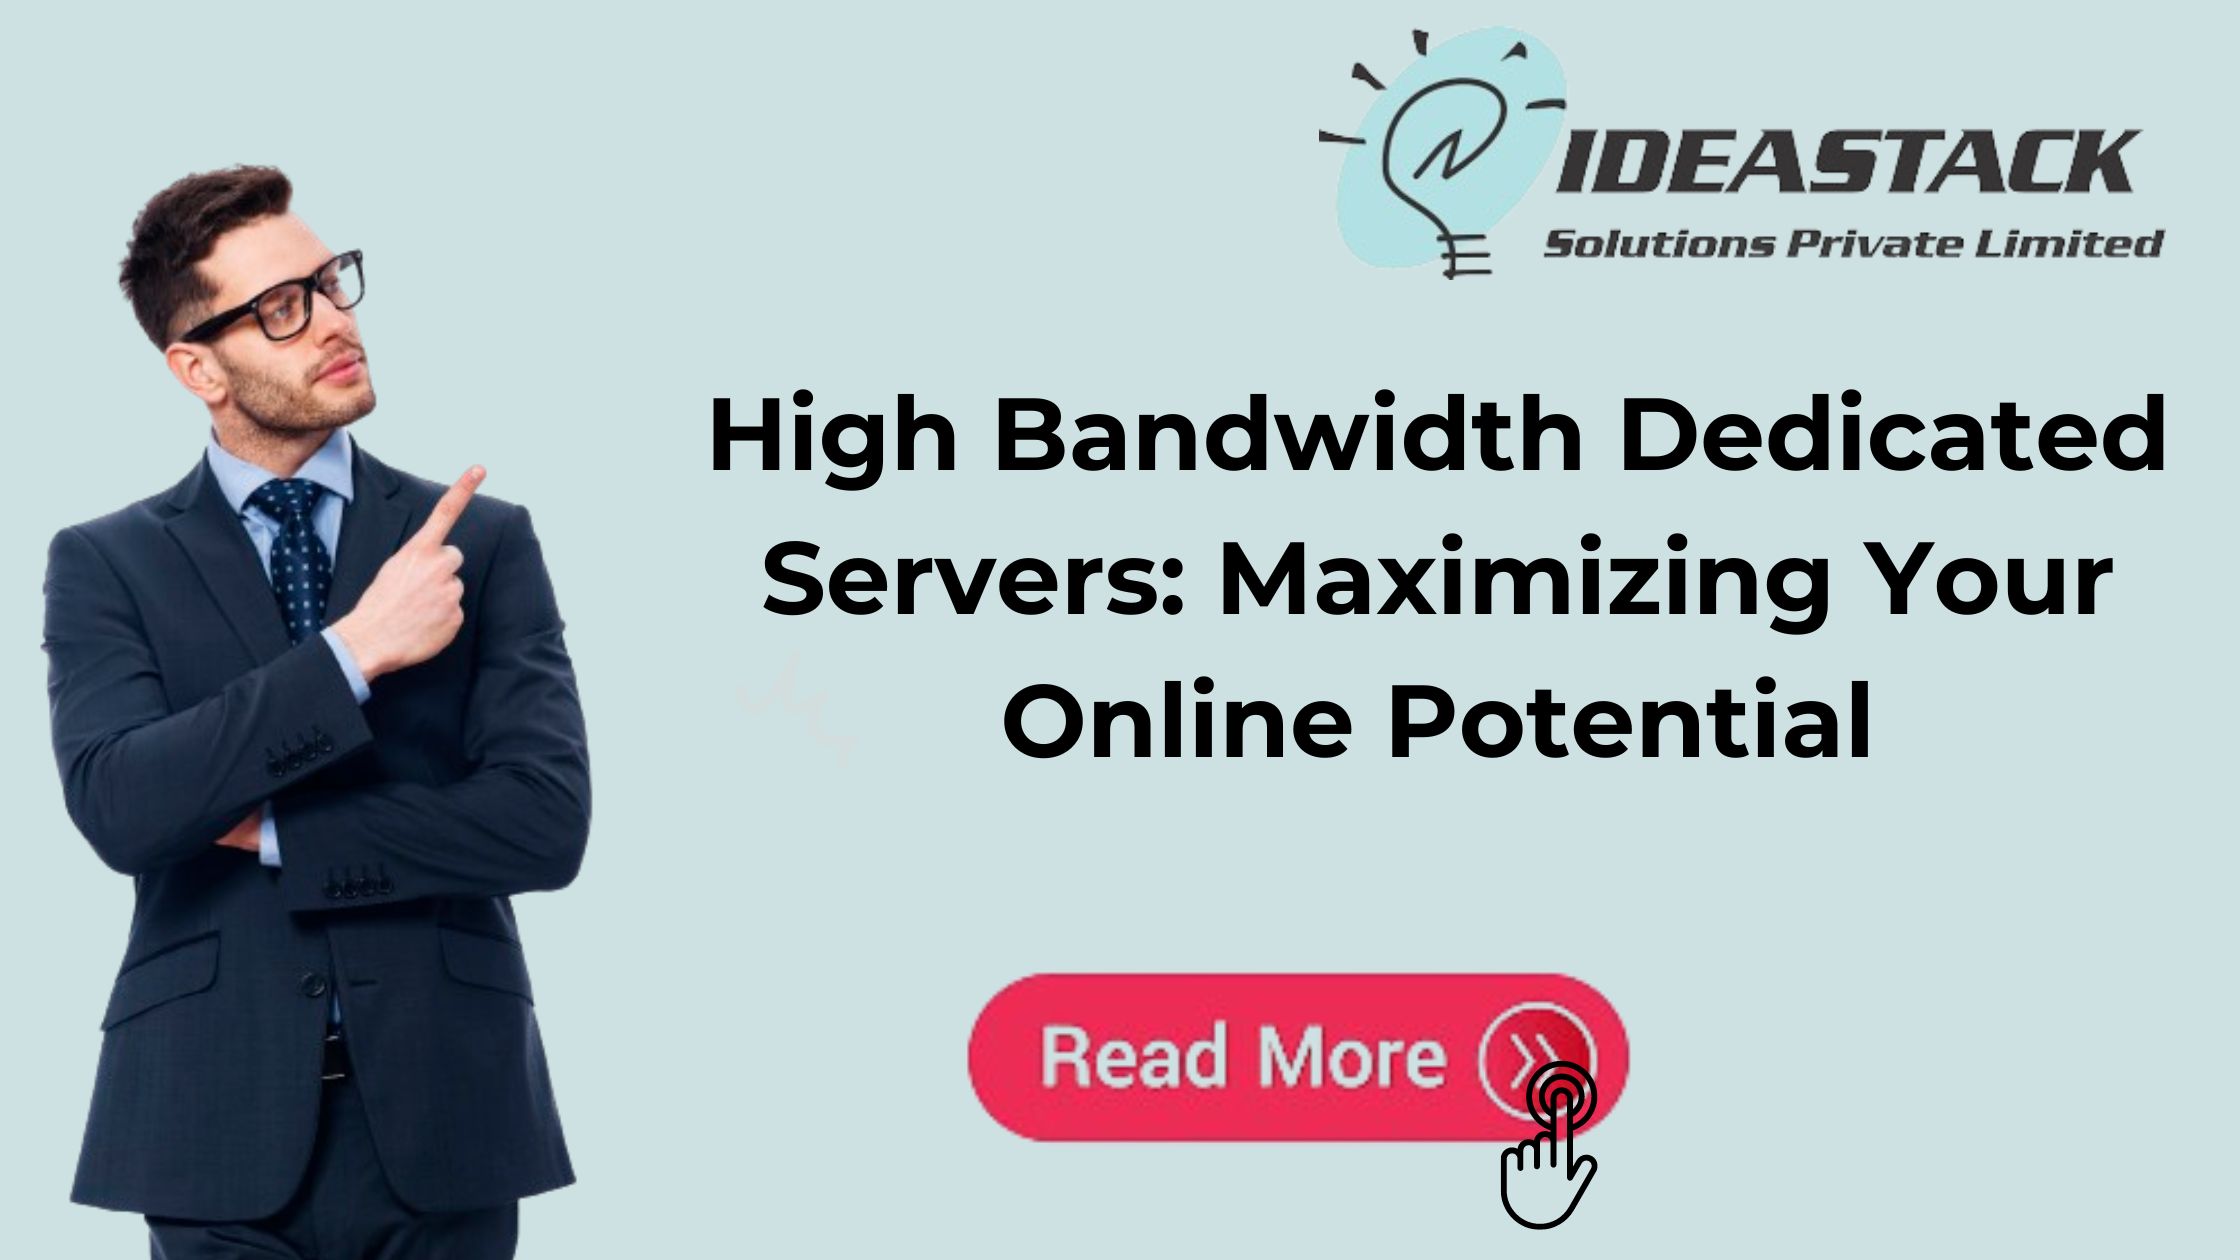 High Bandwidth Dedicated Servers: Maximizing Your Online Potential 